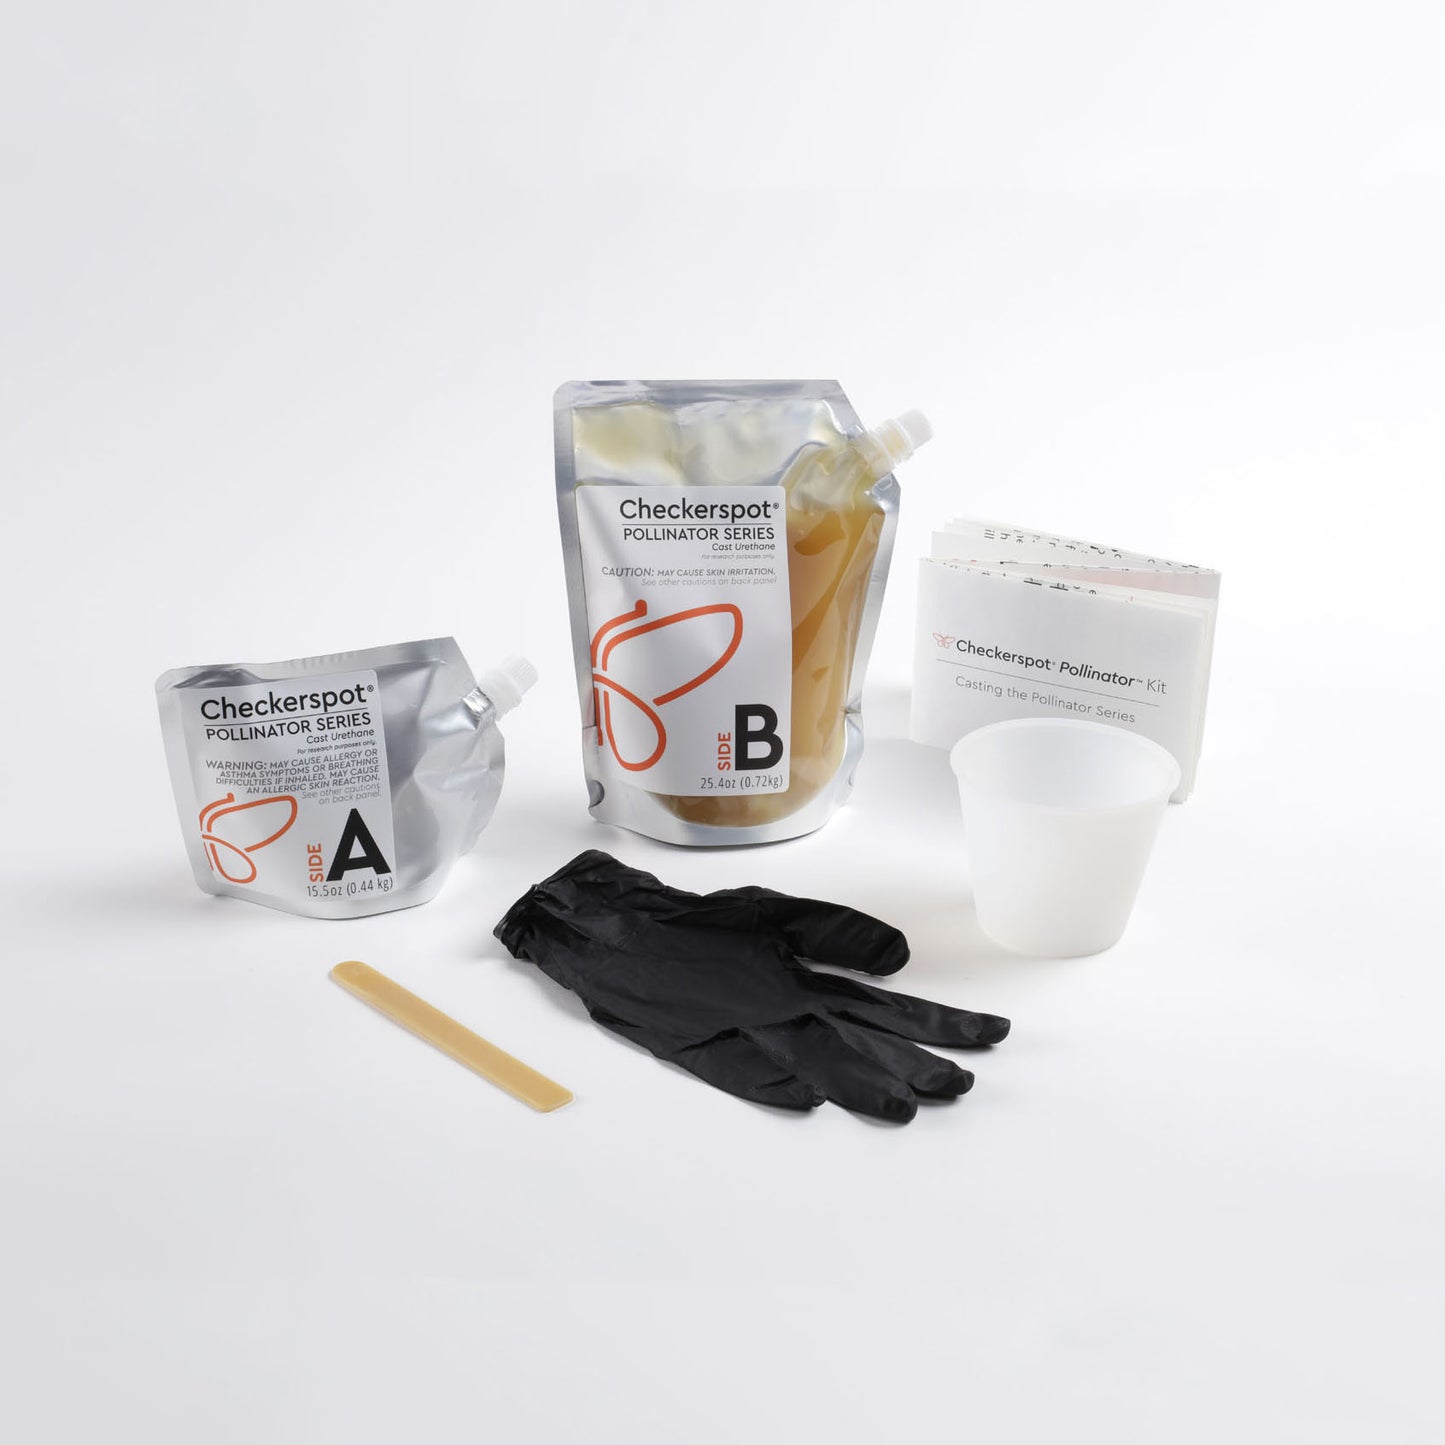 Photo: 6 objects on a white background. In the back row, there is a small aluminum spouted pouch that says "Side A" on it. Next to it is a clear and aluminum flexible spouted pouch that says "Side B", with a beeswax-colored liquid material inside. To the right is a white folded piece of paper that says “Checkerspot® Pollinator™ Kit, Casting the Pollinator Series”. In the front row is a translucent silicone cup, a large pair of disposable black gloves, and a beeswax colored polyurethane mixing stick. 